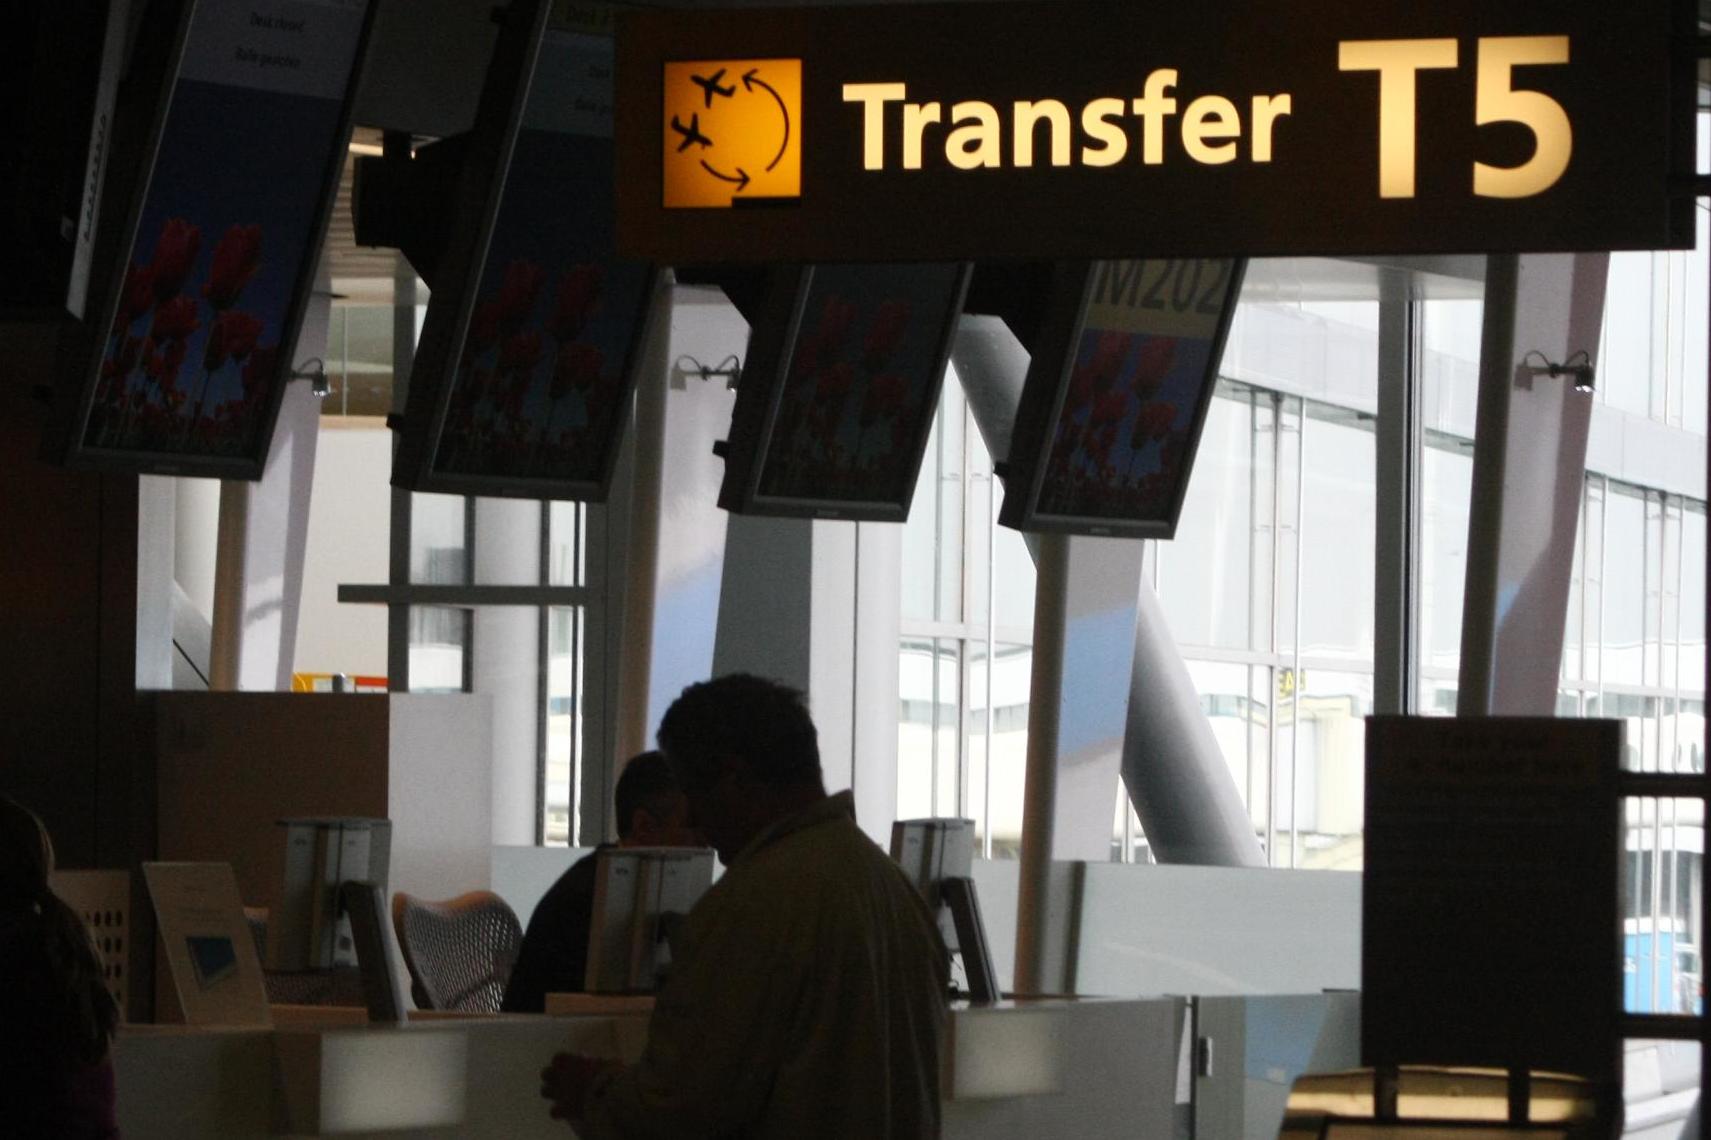 Ground stop: the rules on passenger care at Amsterdam airport are clear